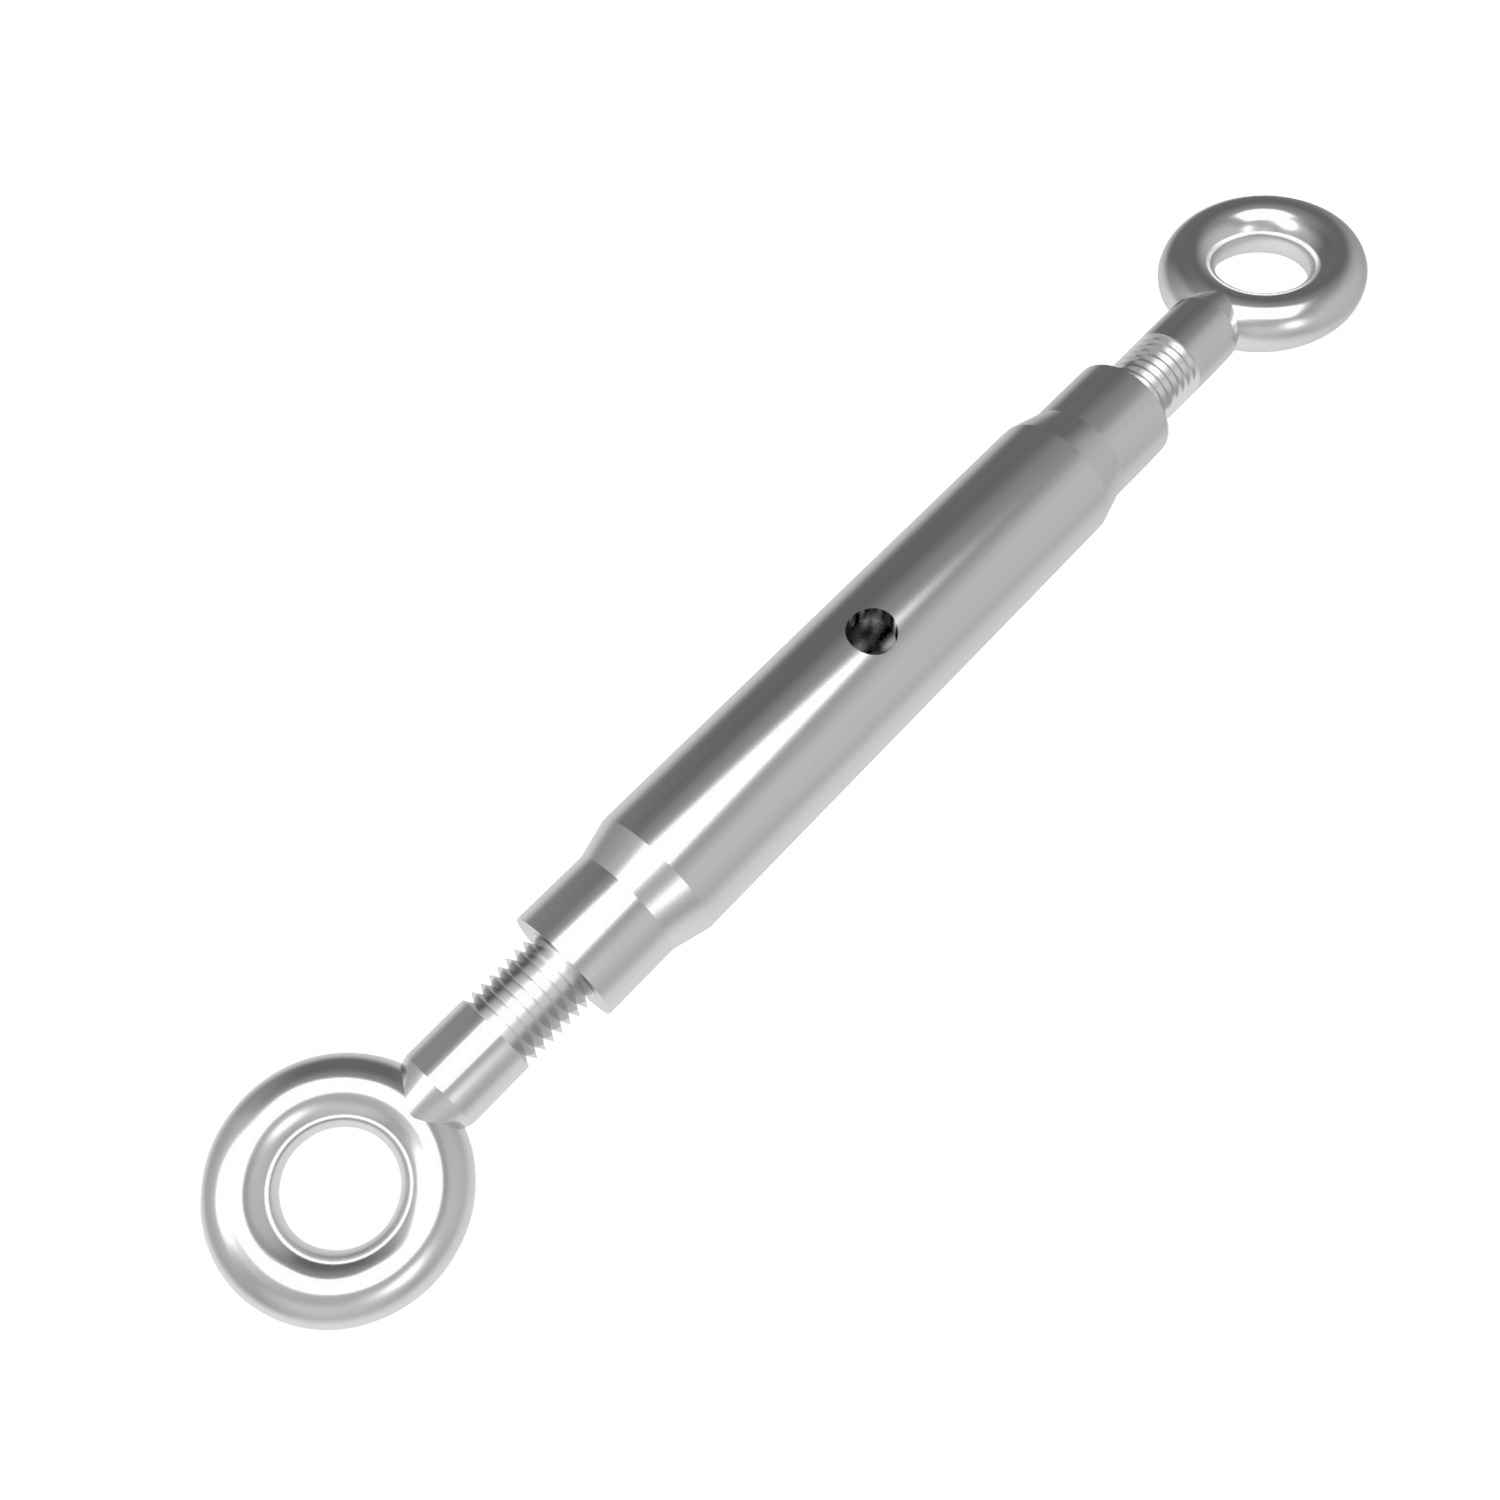 Product R3810, Eye End Pipe Body Turnbuckles stainless steel / 